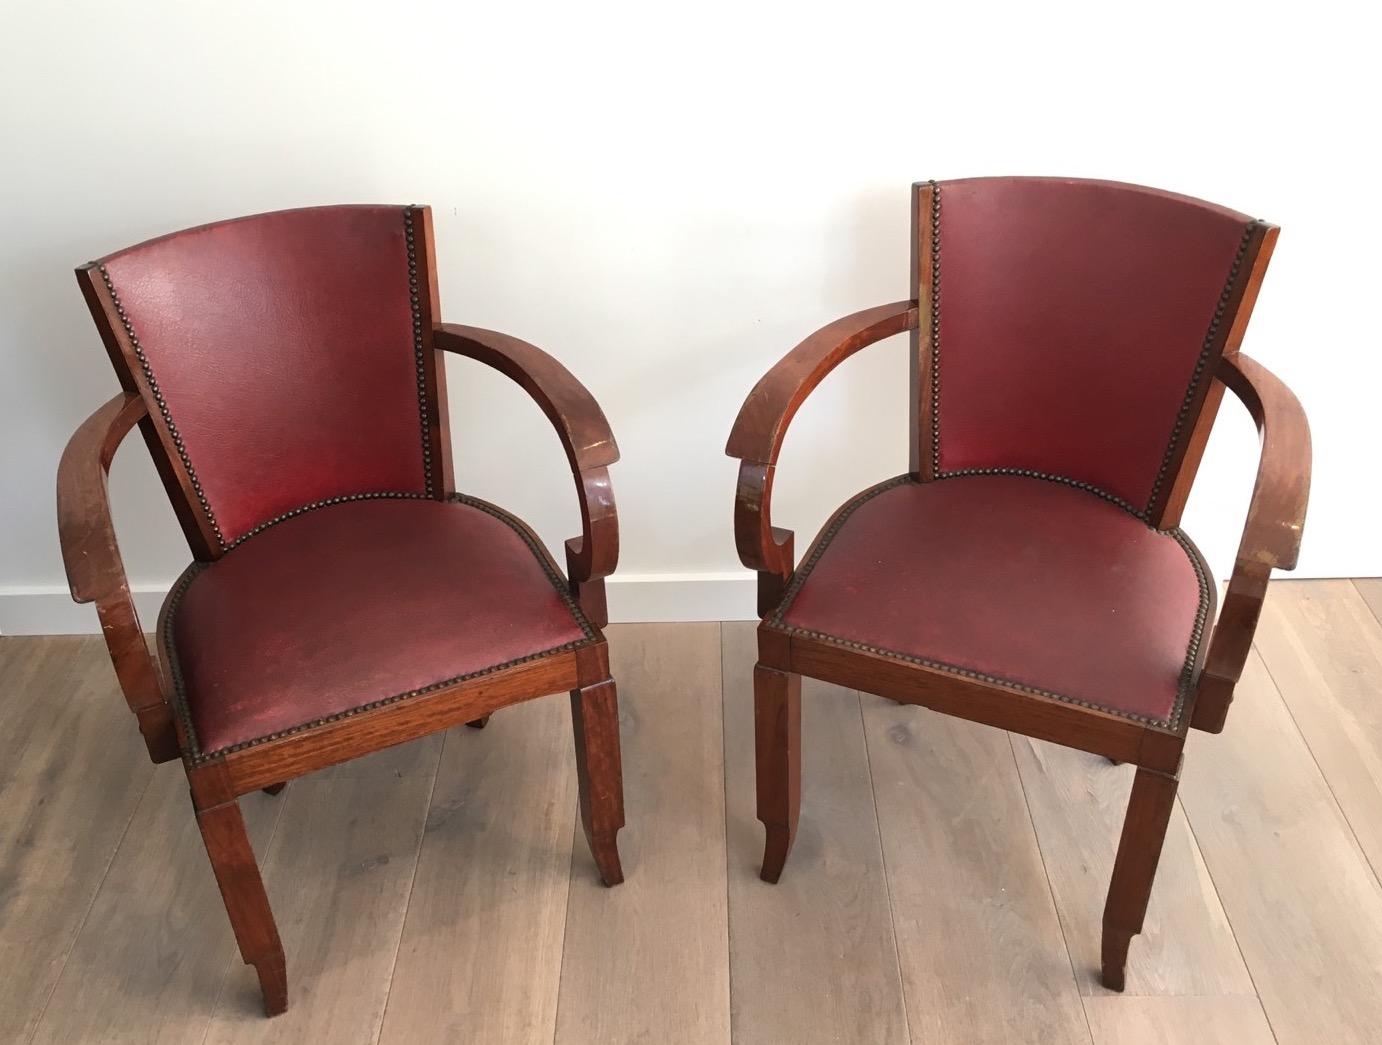 Rare Set of 8 Mahogany and Faux-Leather Art Deco Armchairs, French, circa 1930 For Sale 9